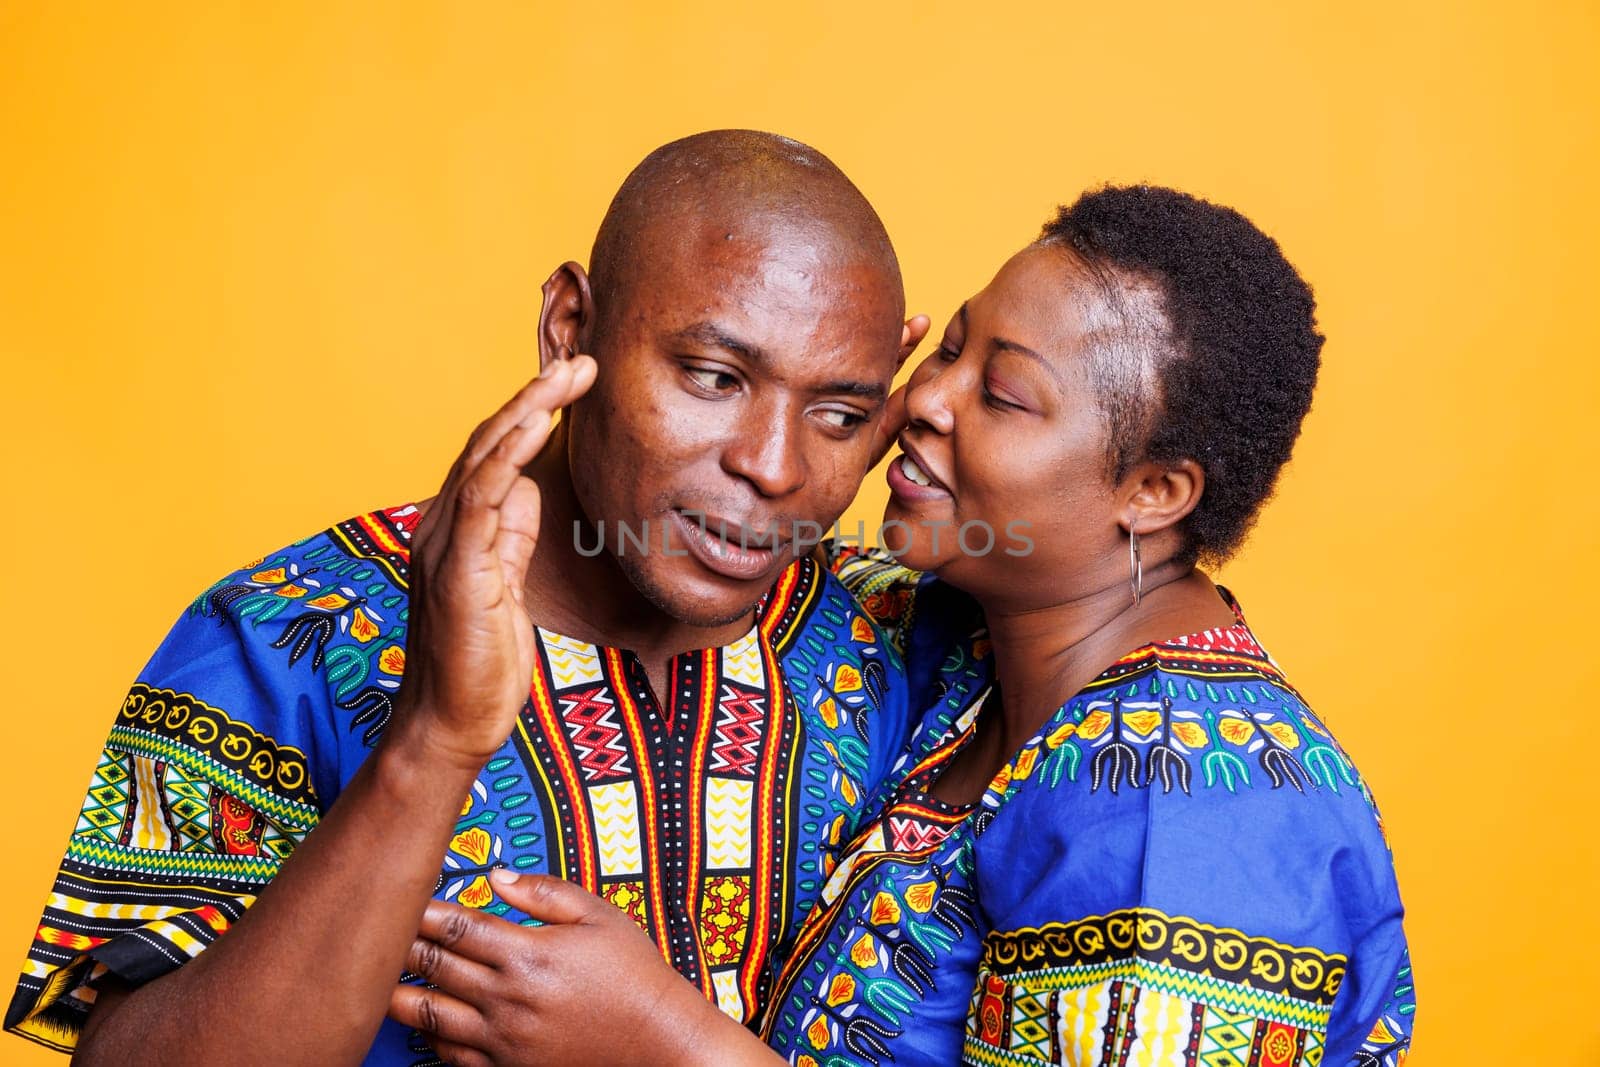 African american man listening to wife whispering with smile on face. Cheerful mid adult woman telling secret to boyfriend in ear, showing relationship bonding and love concept